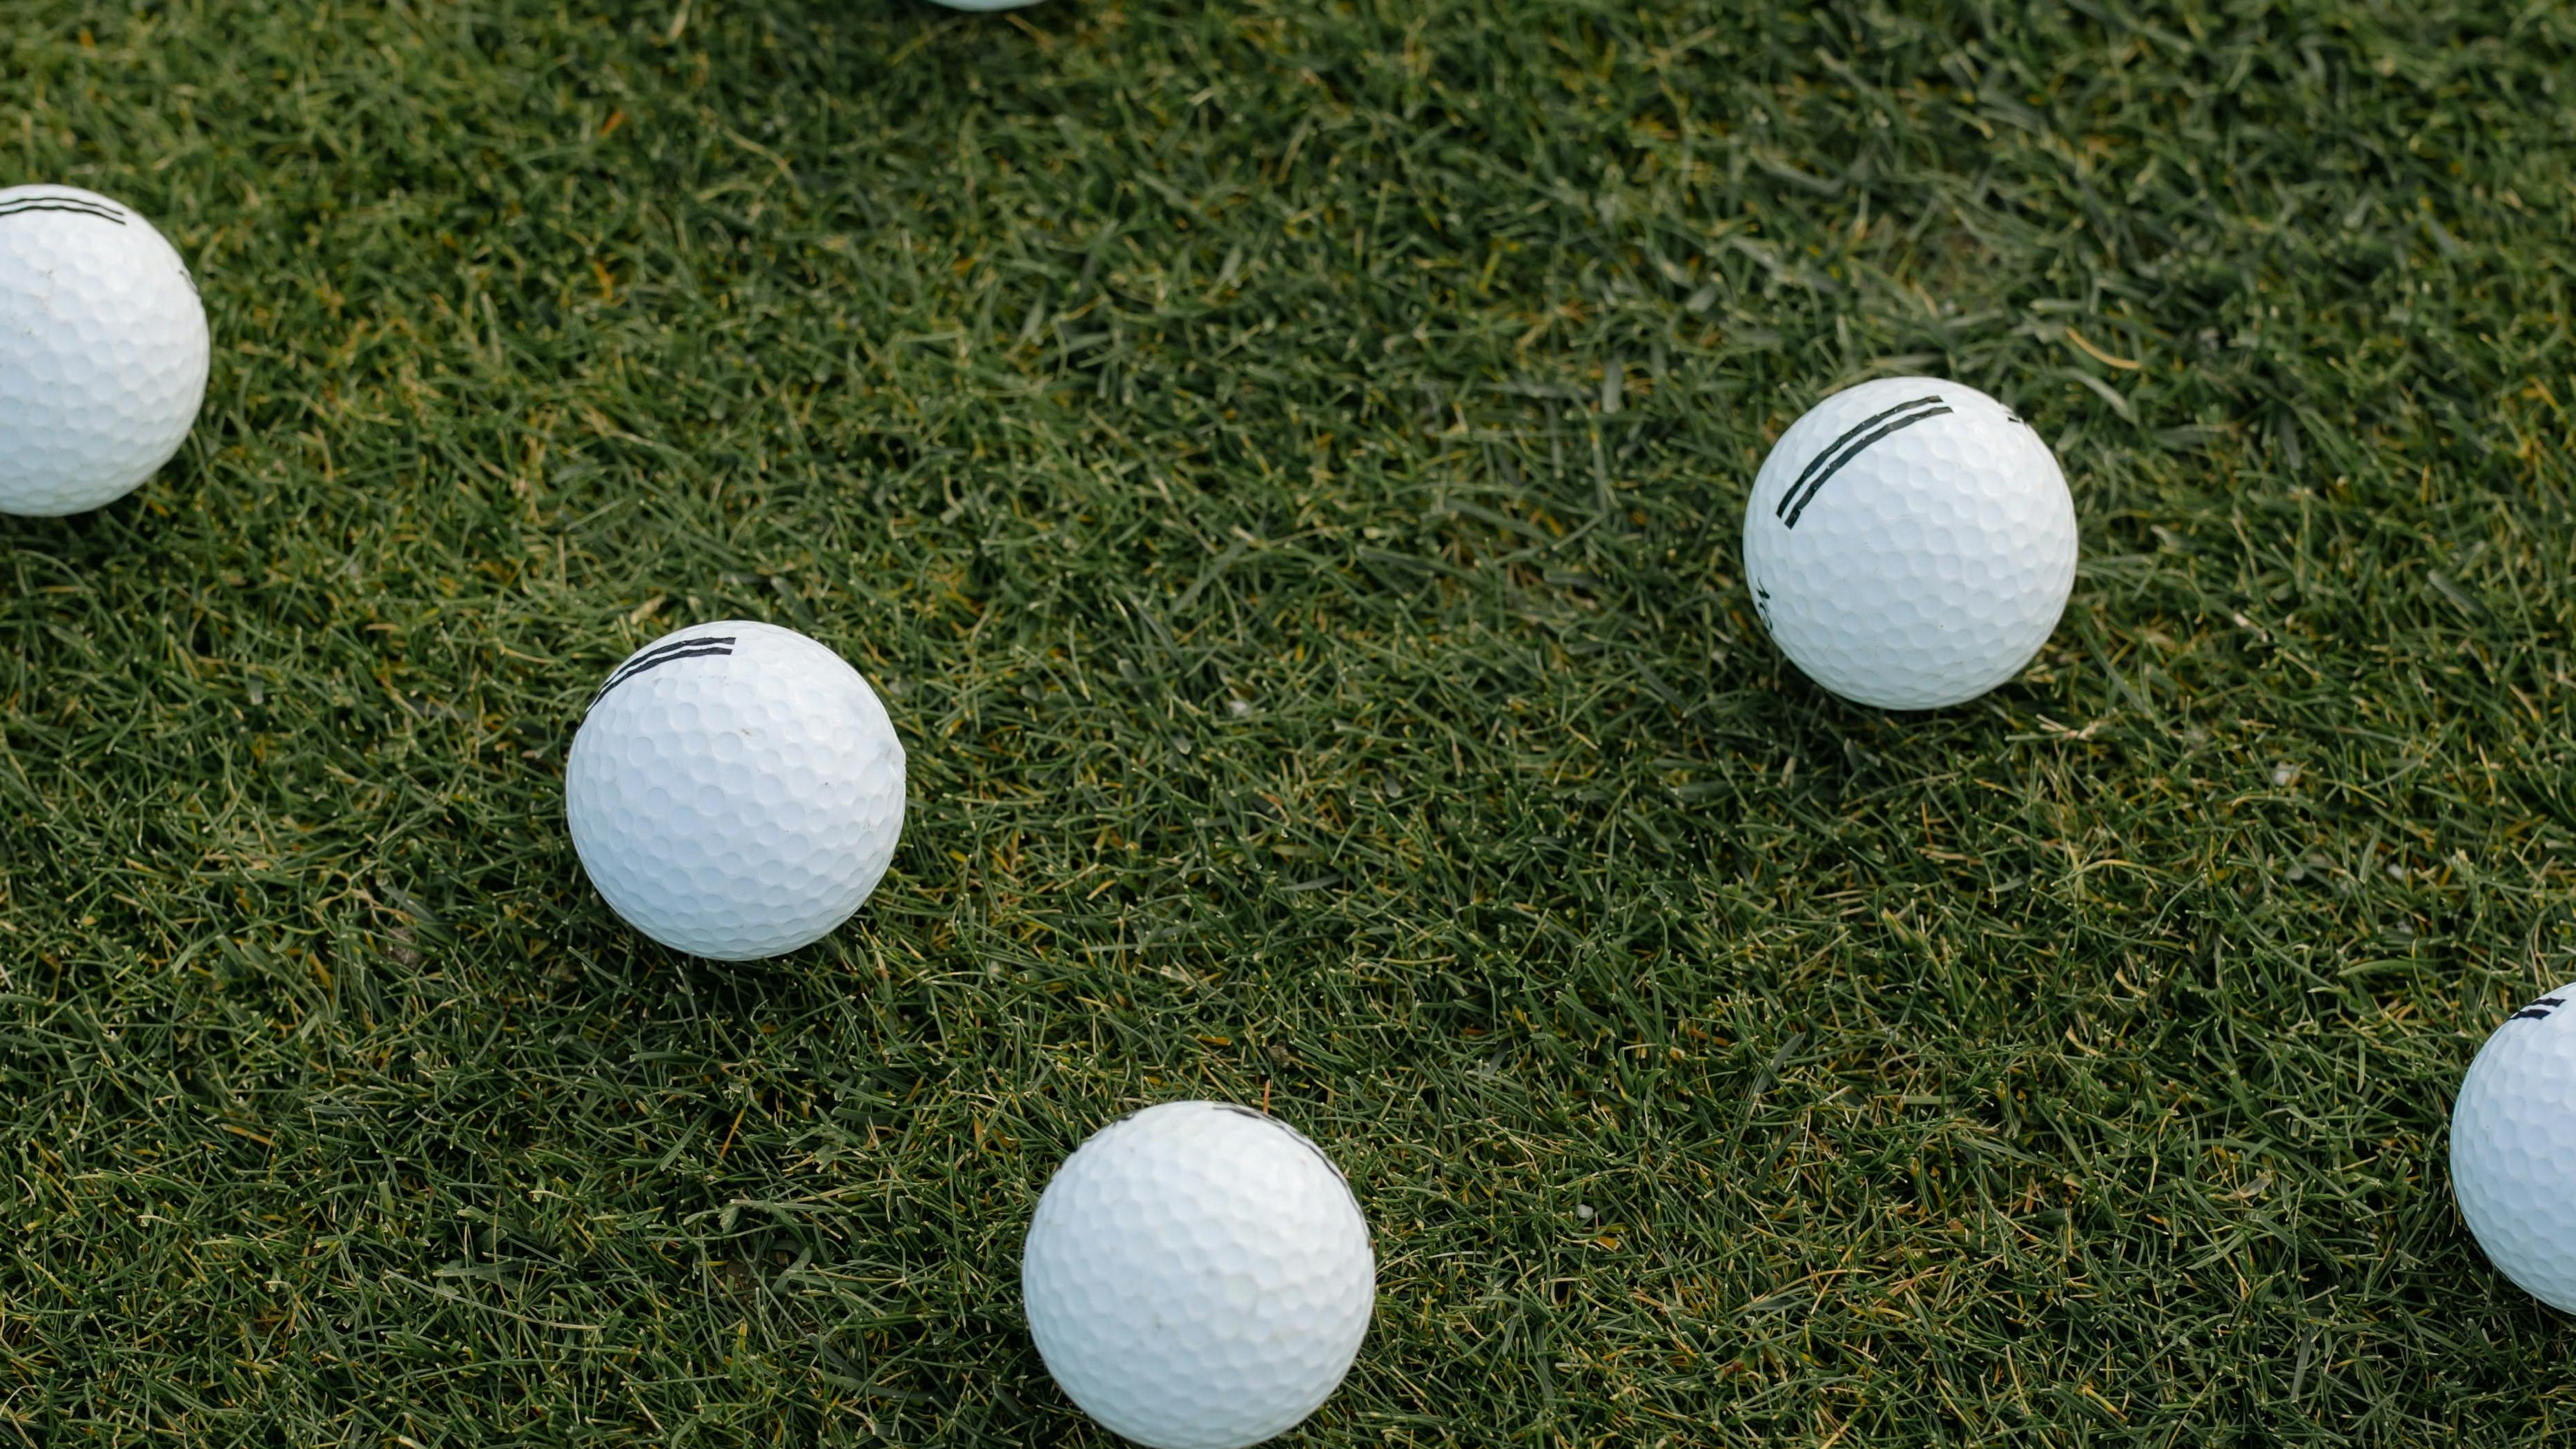 Golf Balls laying on the grass. 